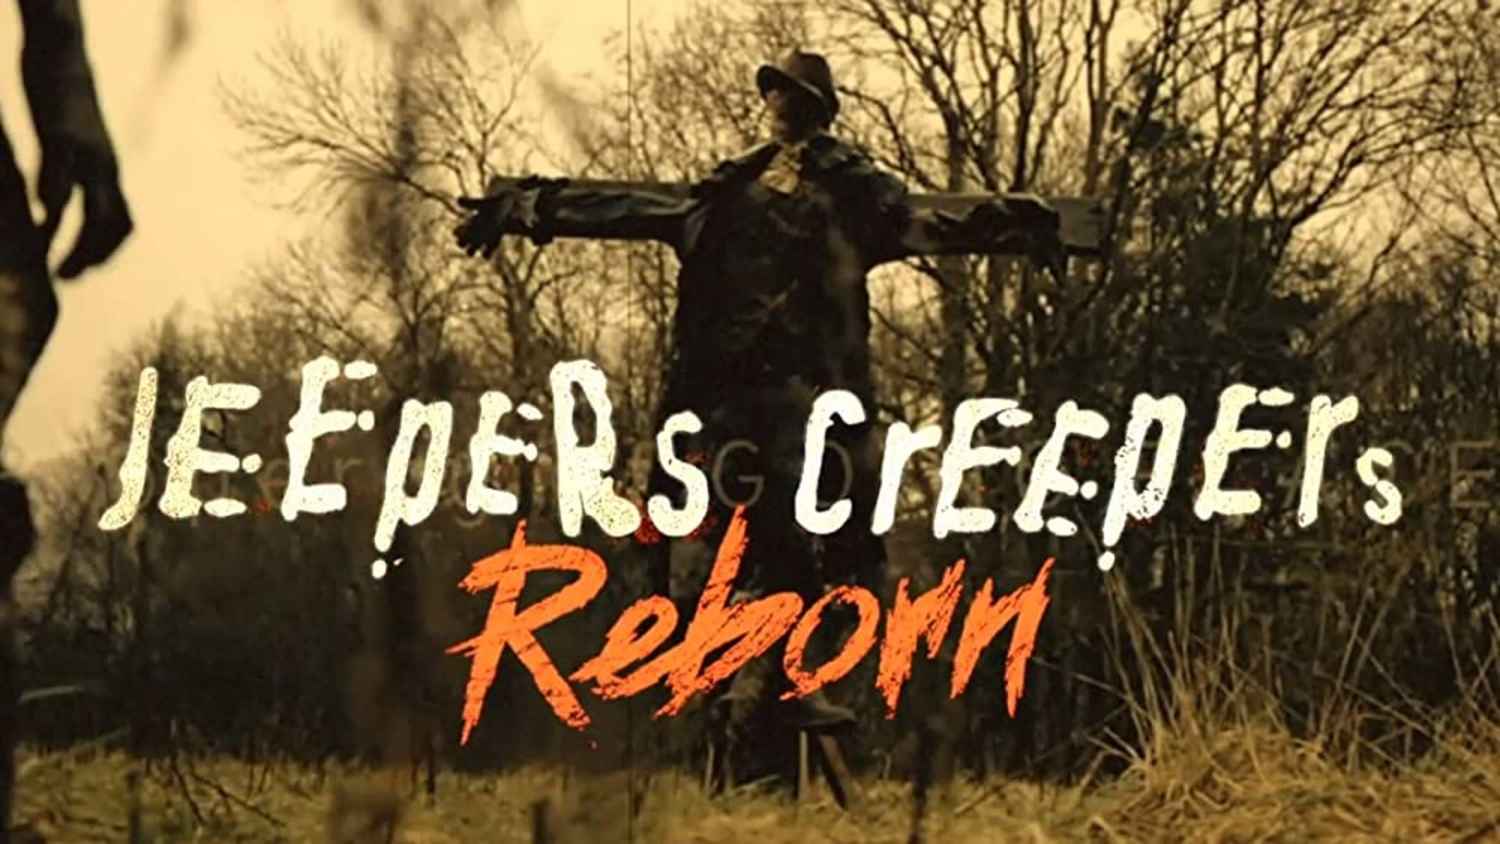 watch jeepers creepers free online